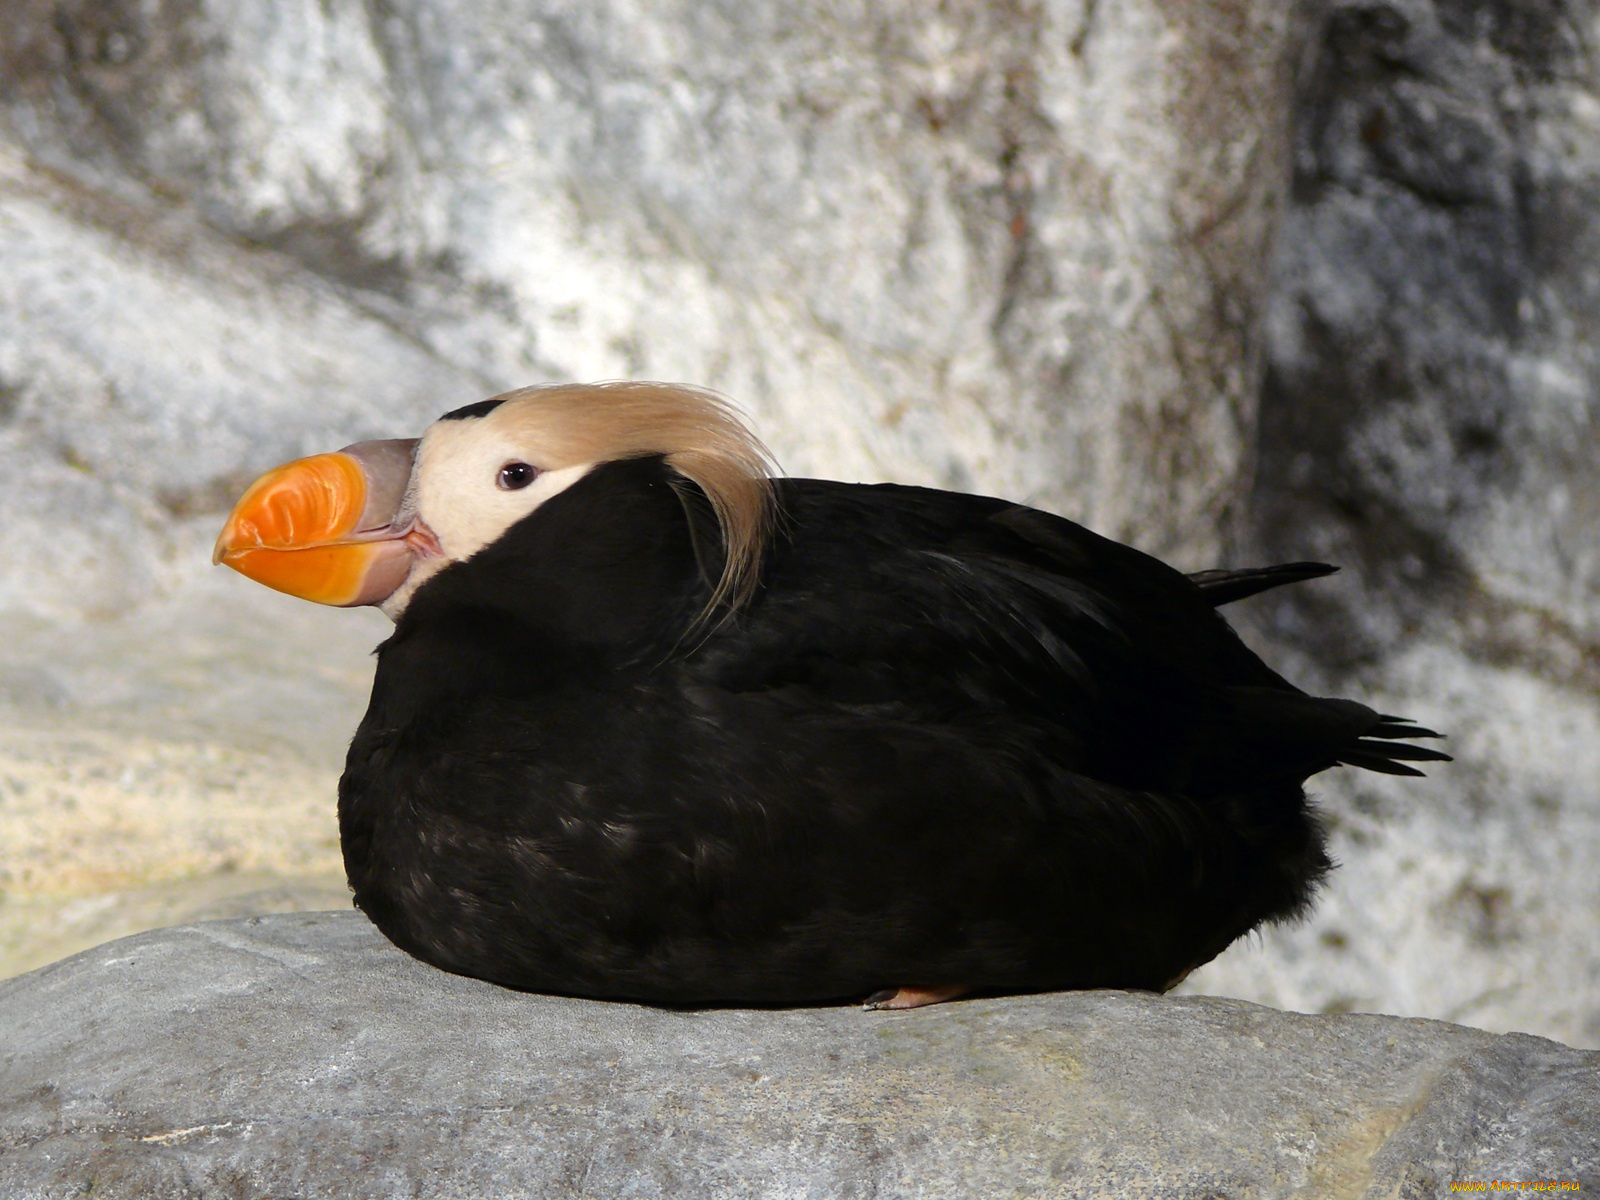 tufted, puffin, in, the, penguin, and, coast, животные, тупики